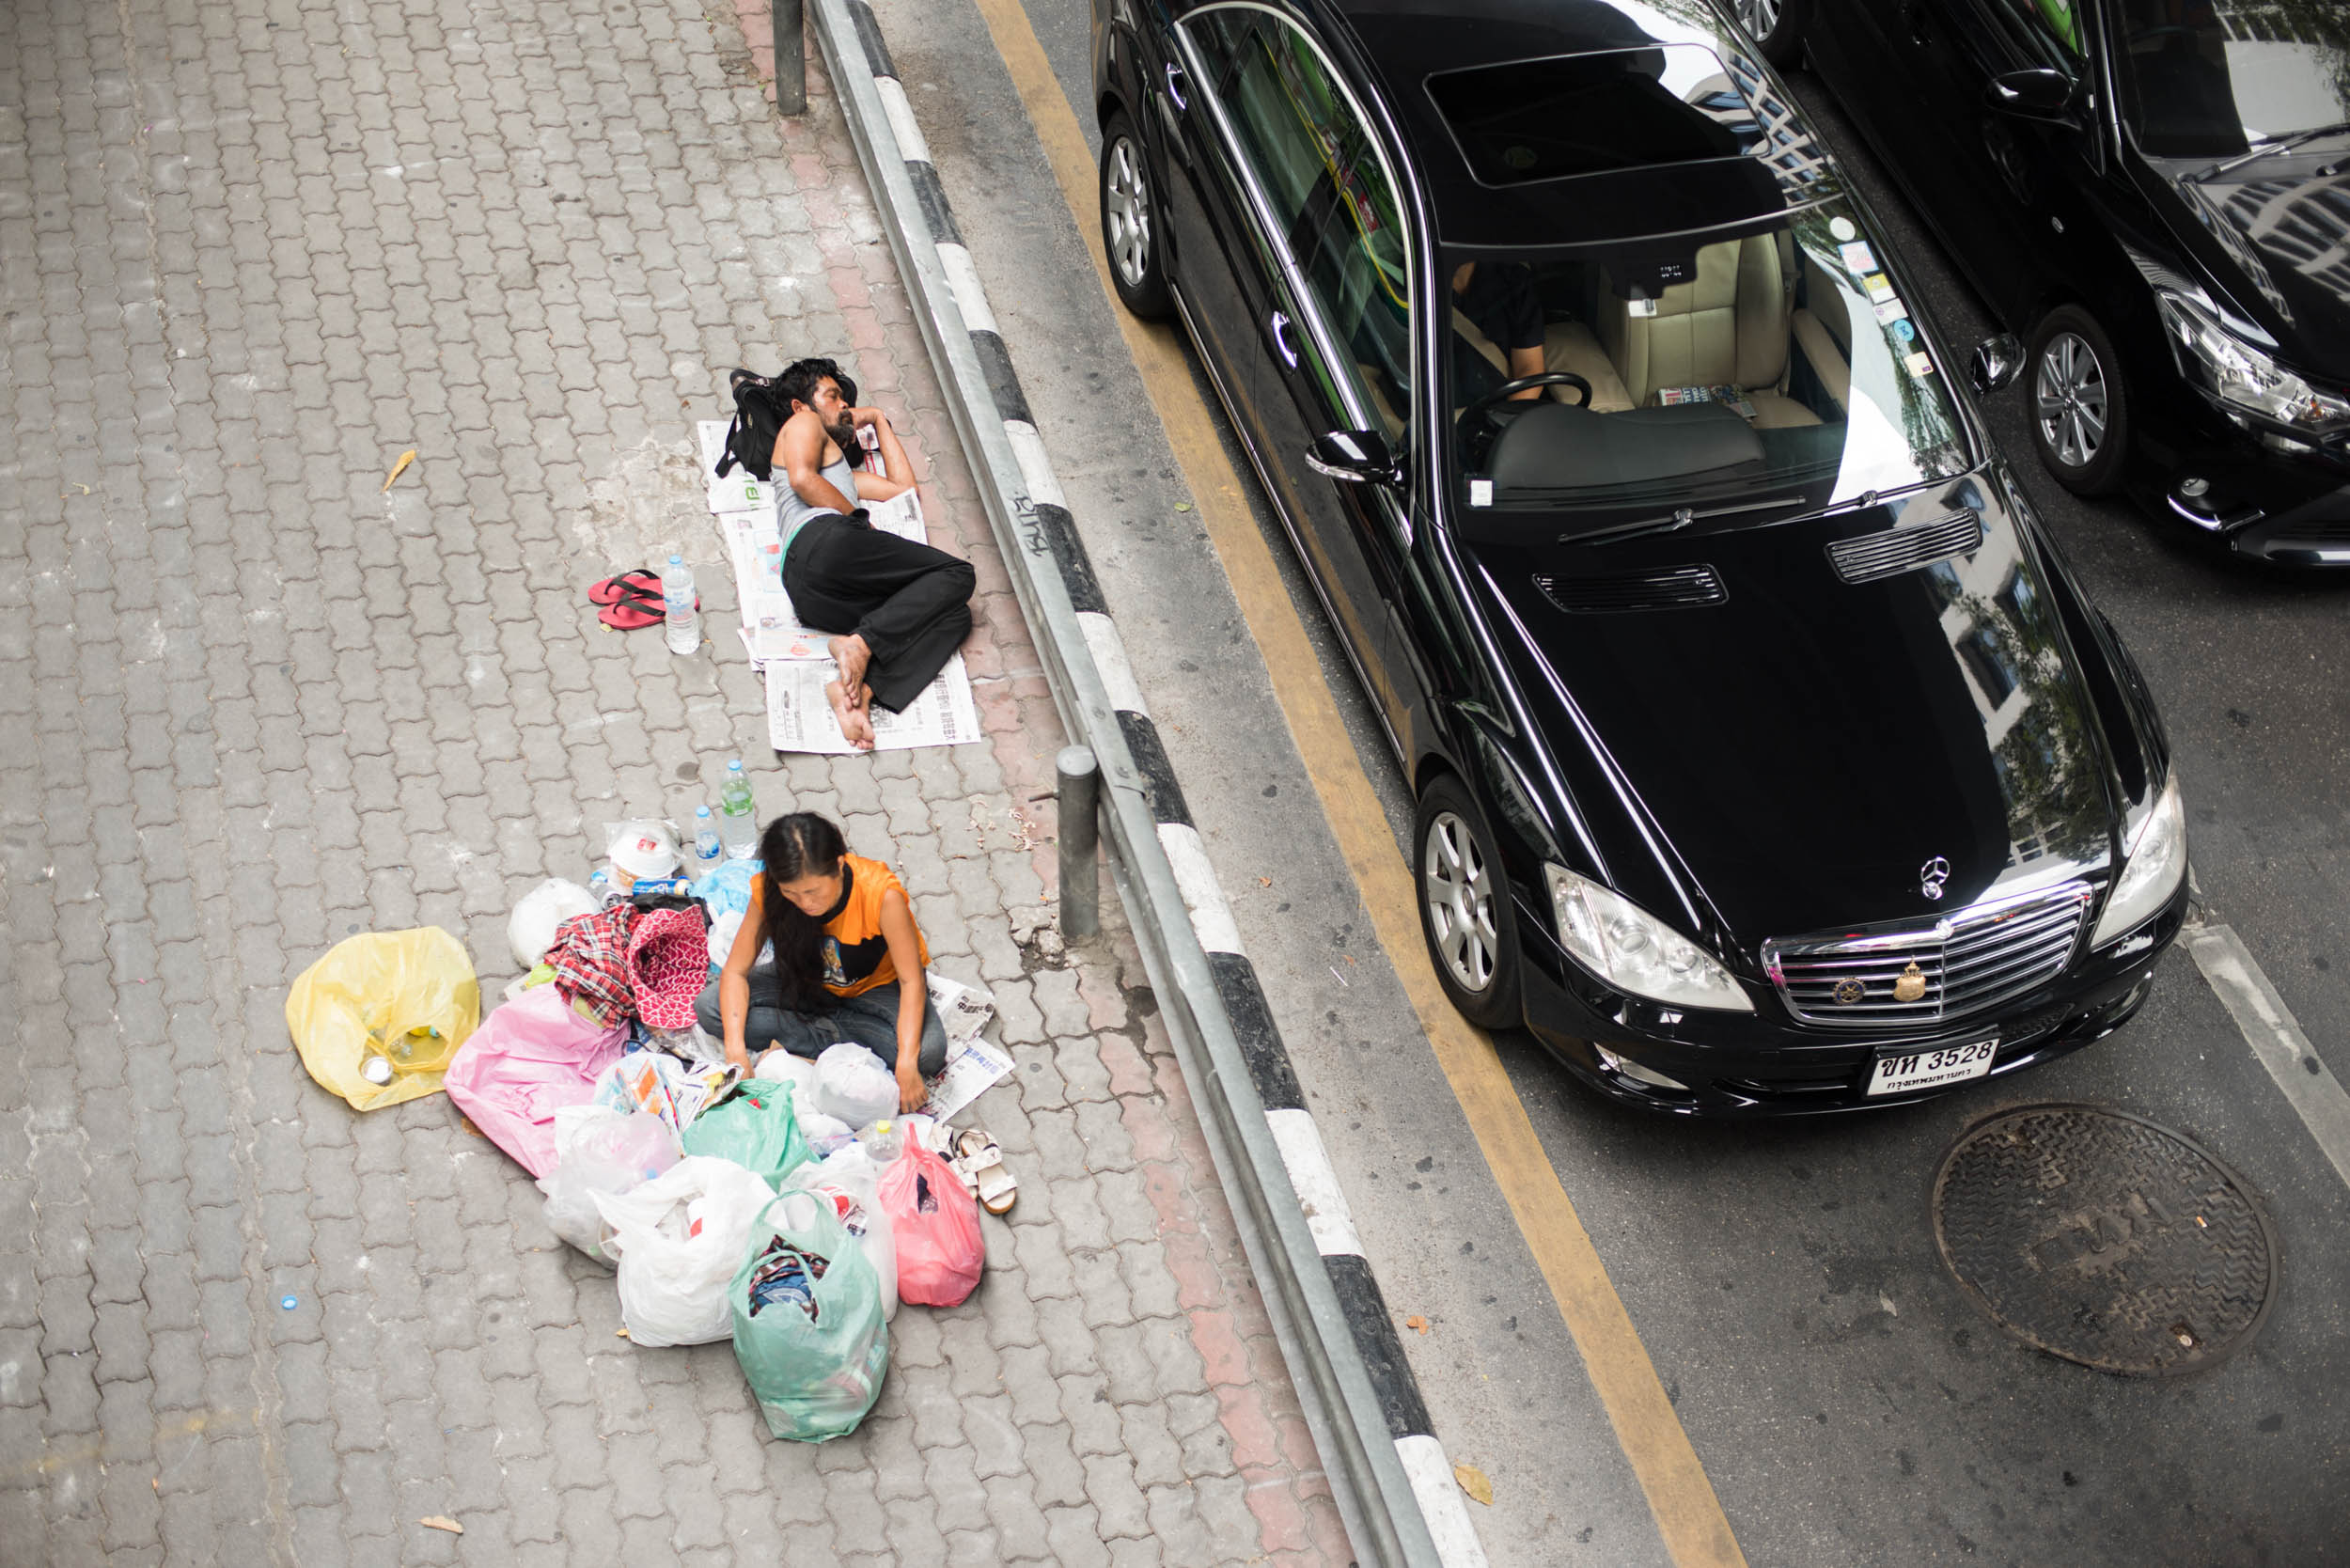 Homeless are juxtaposed with wealthy on streets of Bangkok, Thailand.